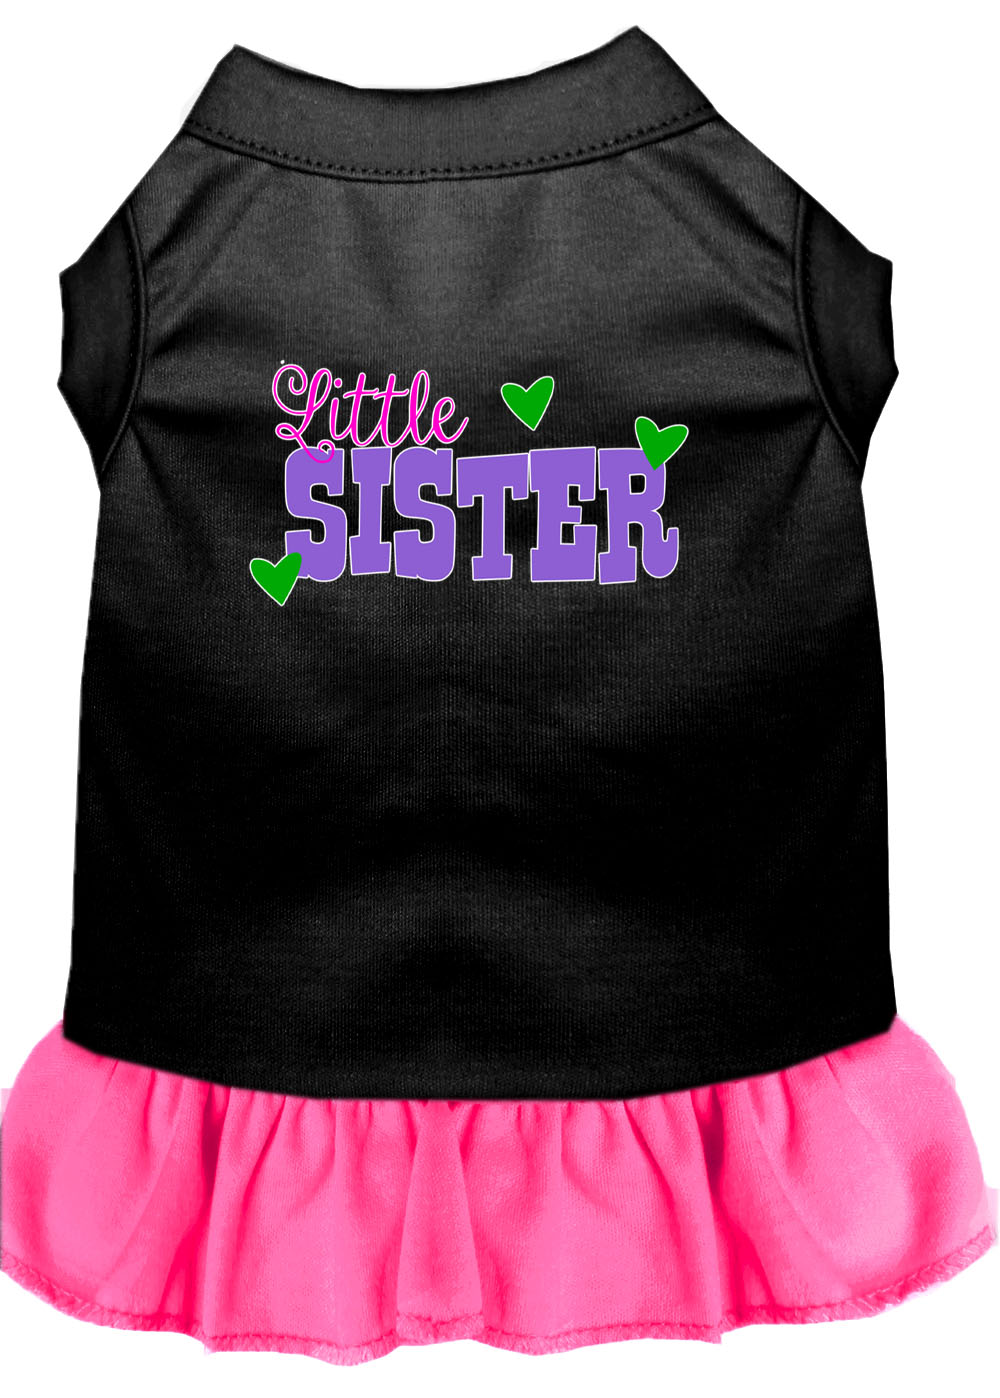 Little Sister Screen Print Dog Dress Black with Bright Pink Lg